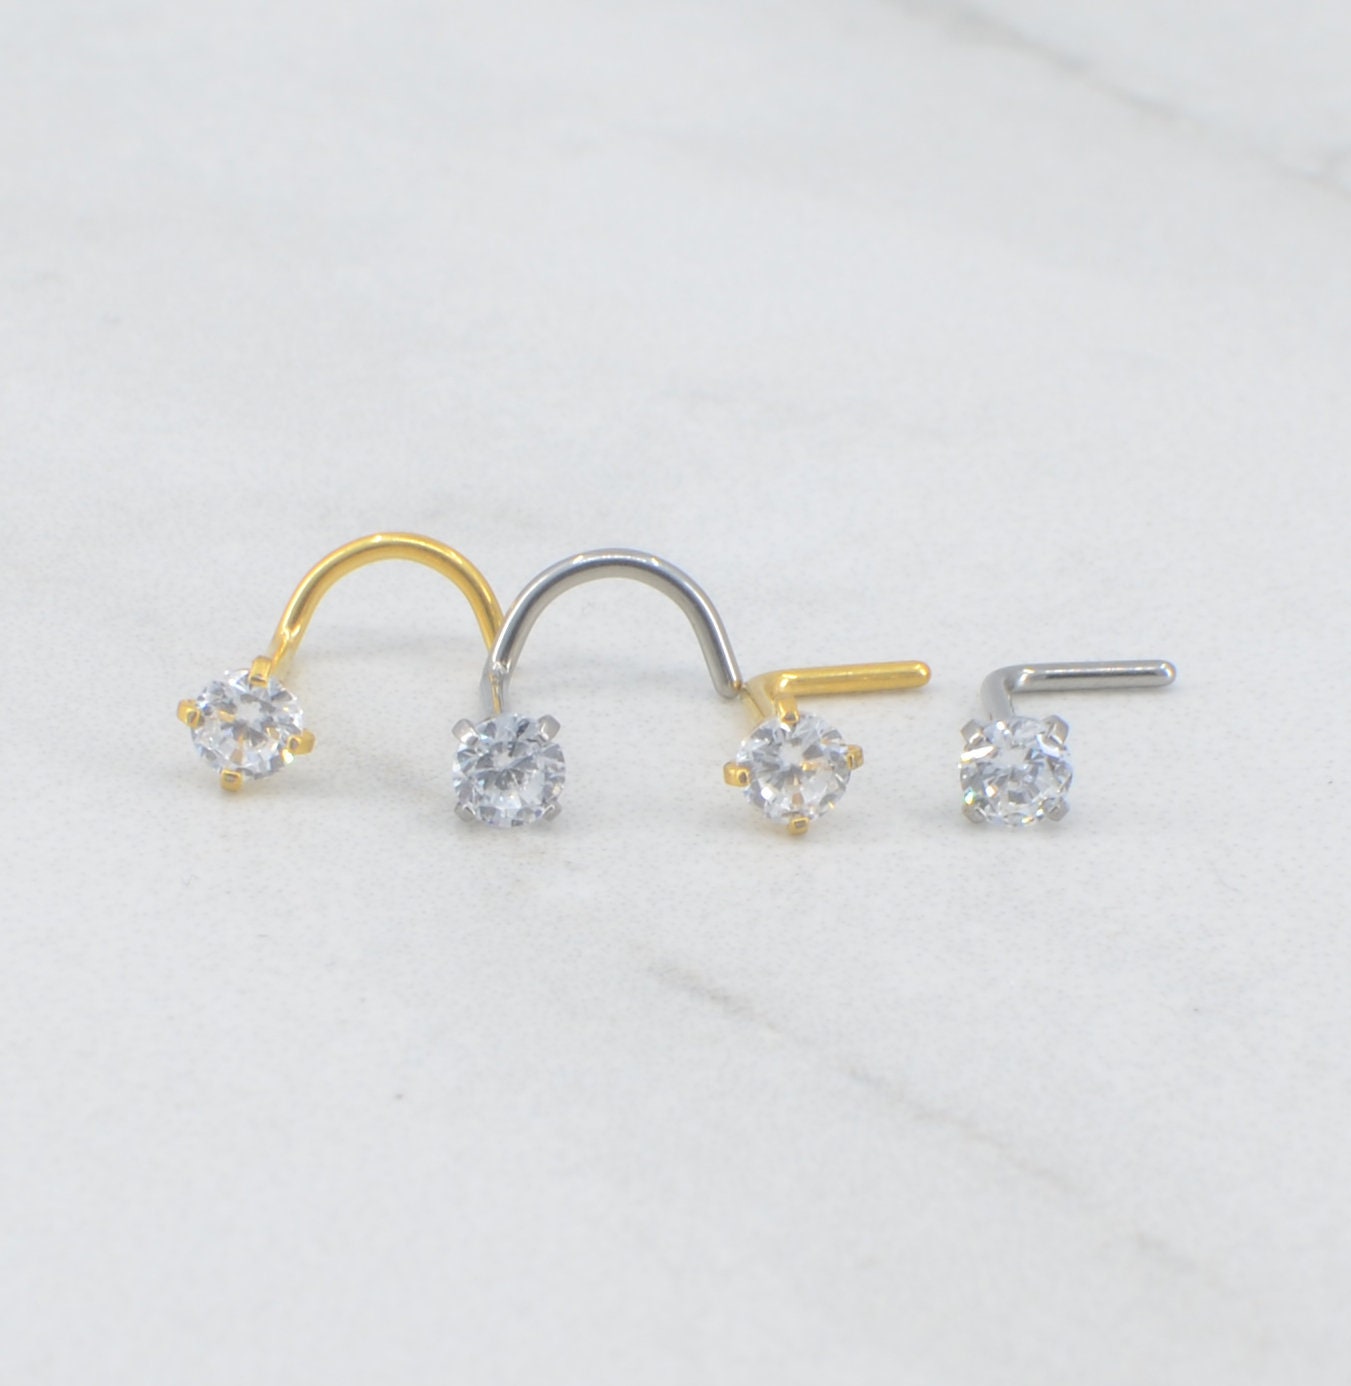 NEW-2mm/3mm L Shape Nose Rings -Implant Grade Titanium- Small Petite Stud Gold Tone 20G/18G -L Bend Nose Ring- Clear CZ Nose Screw